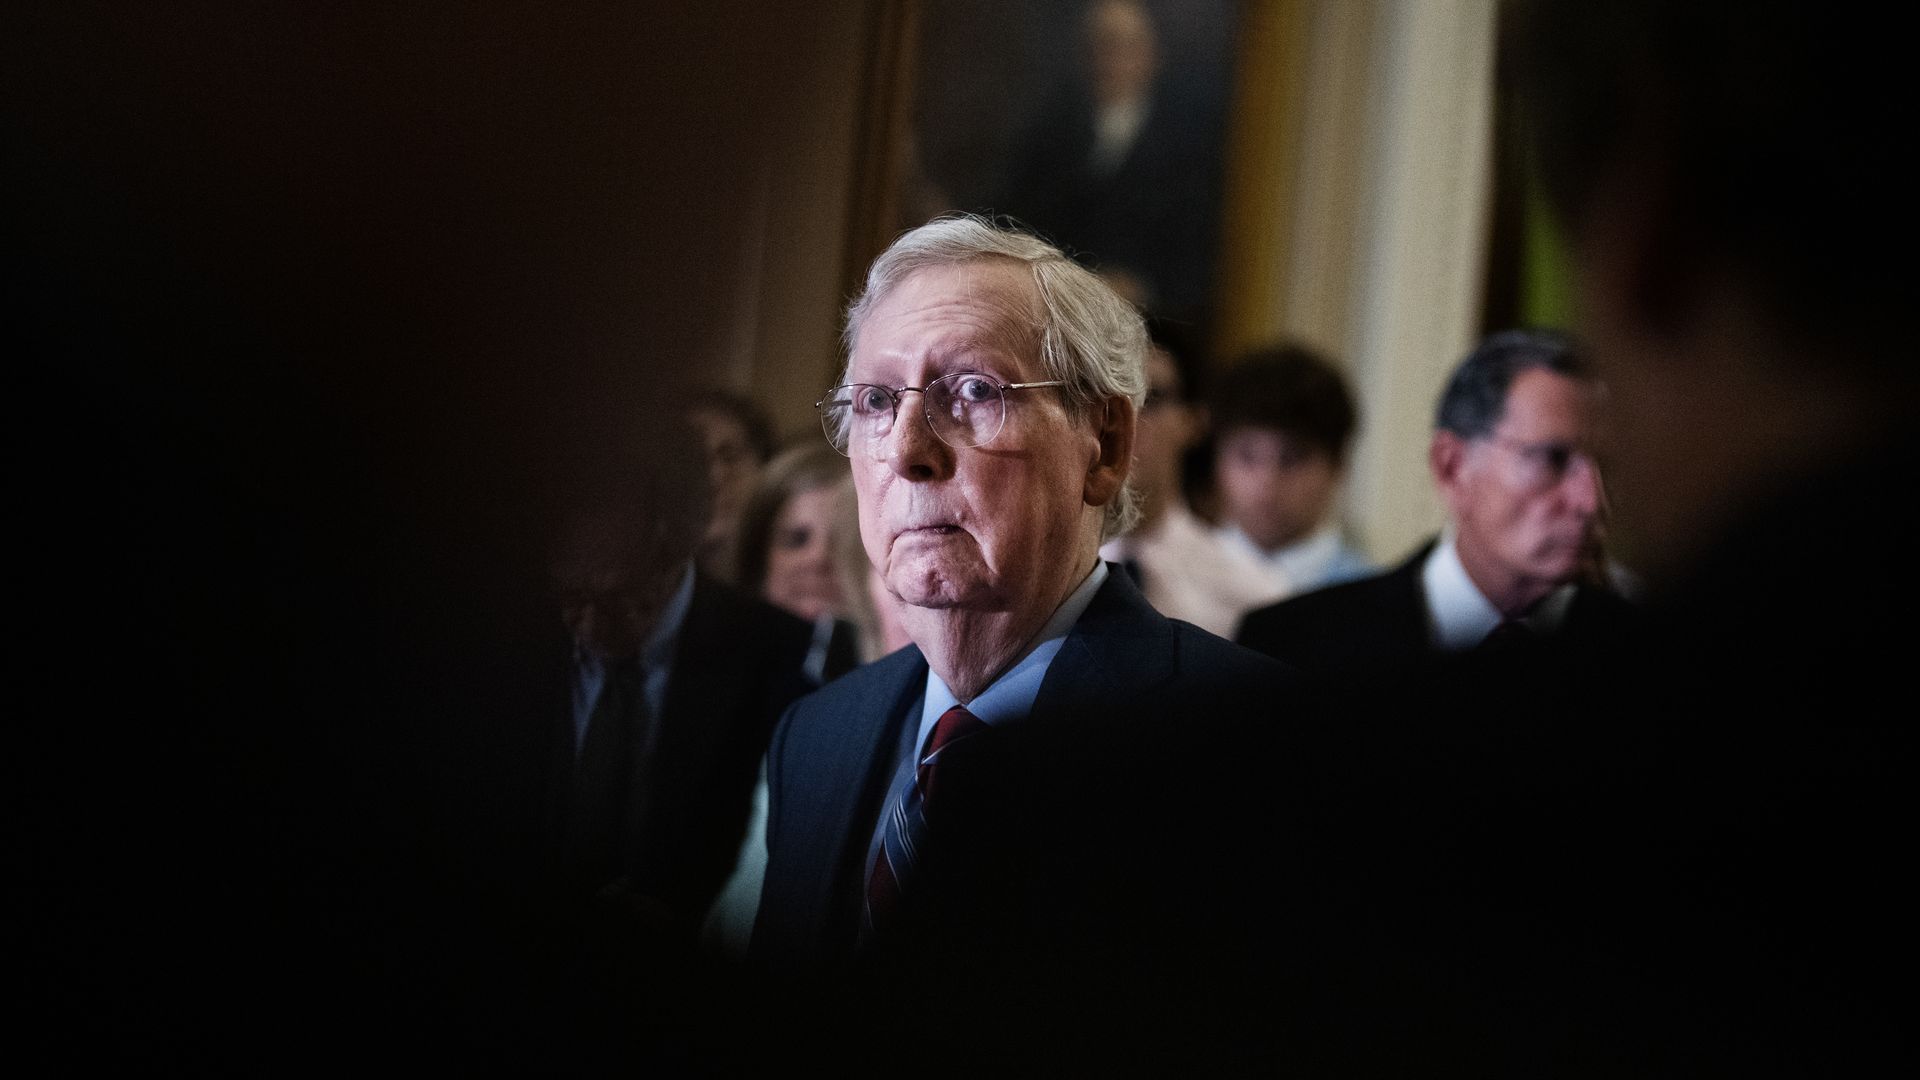 Senate Minority Leader Mitch McConnell takes questions from reporters at a news conference in which he froze midsentence for about 20 seconds.